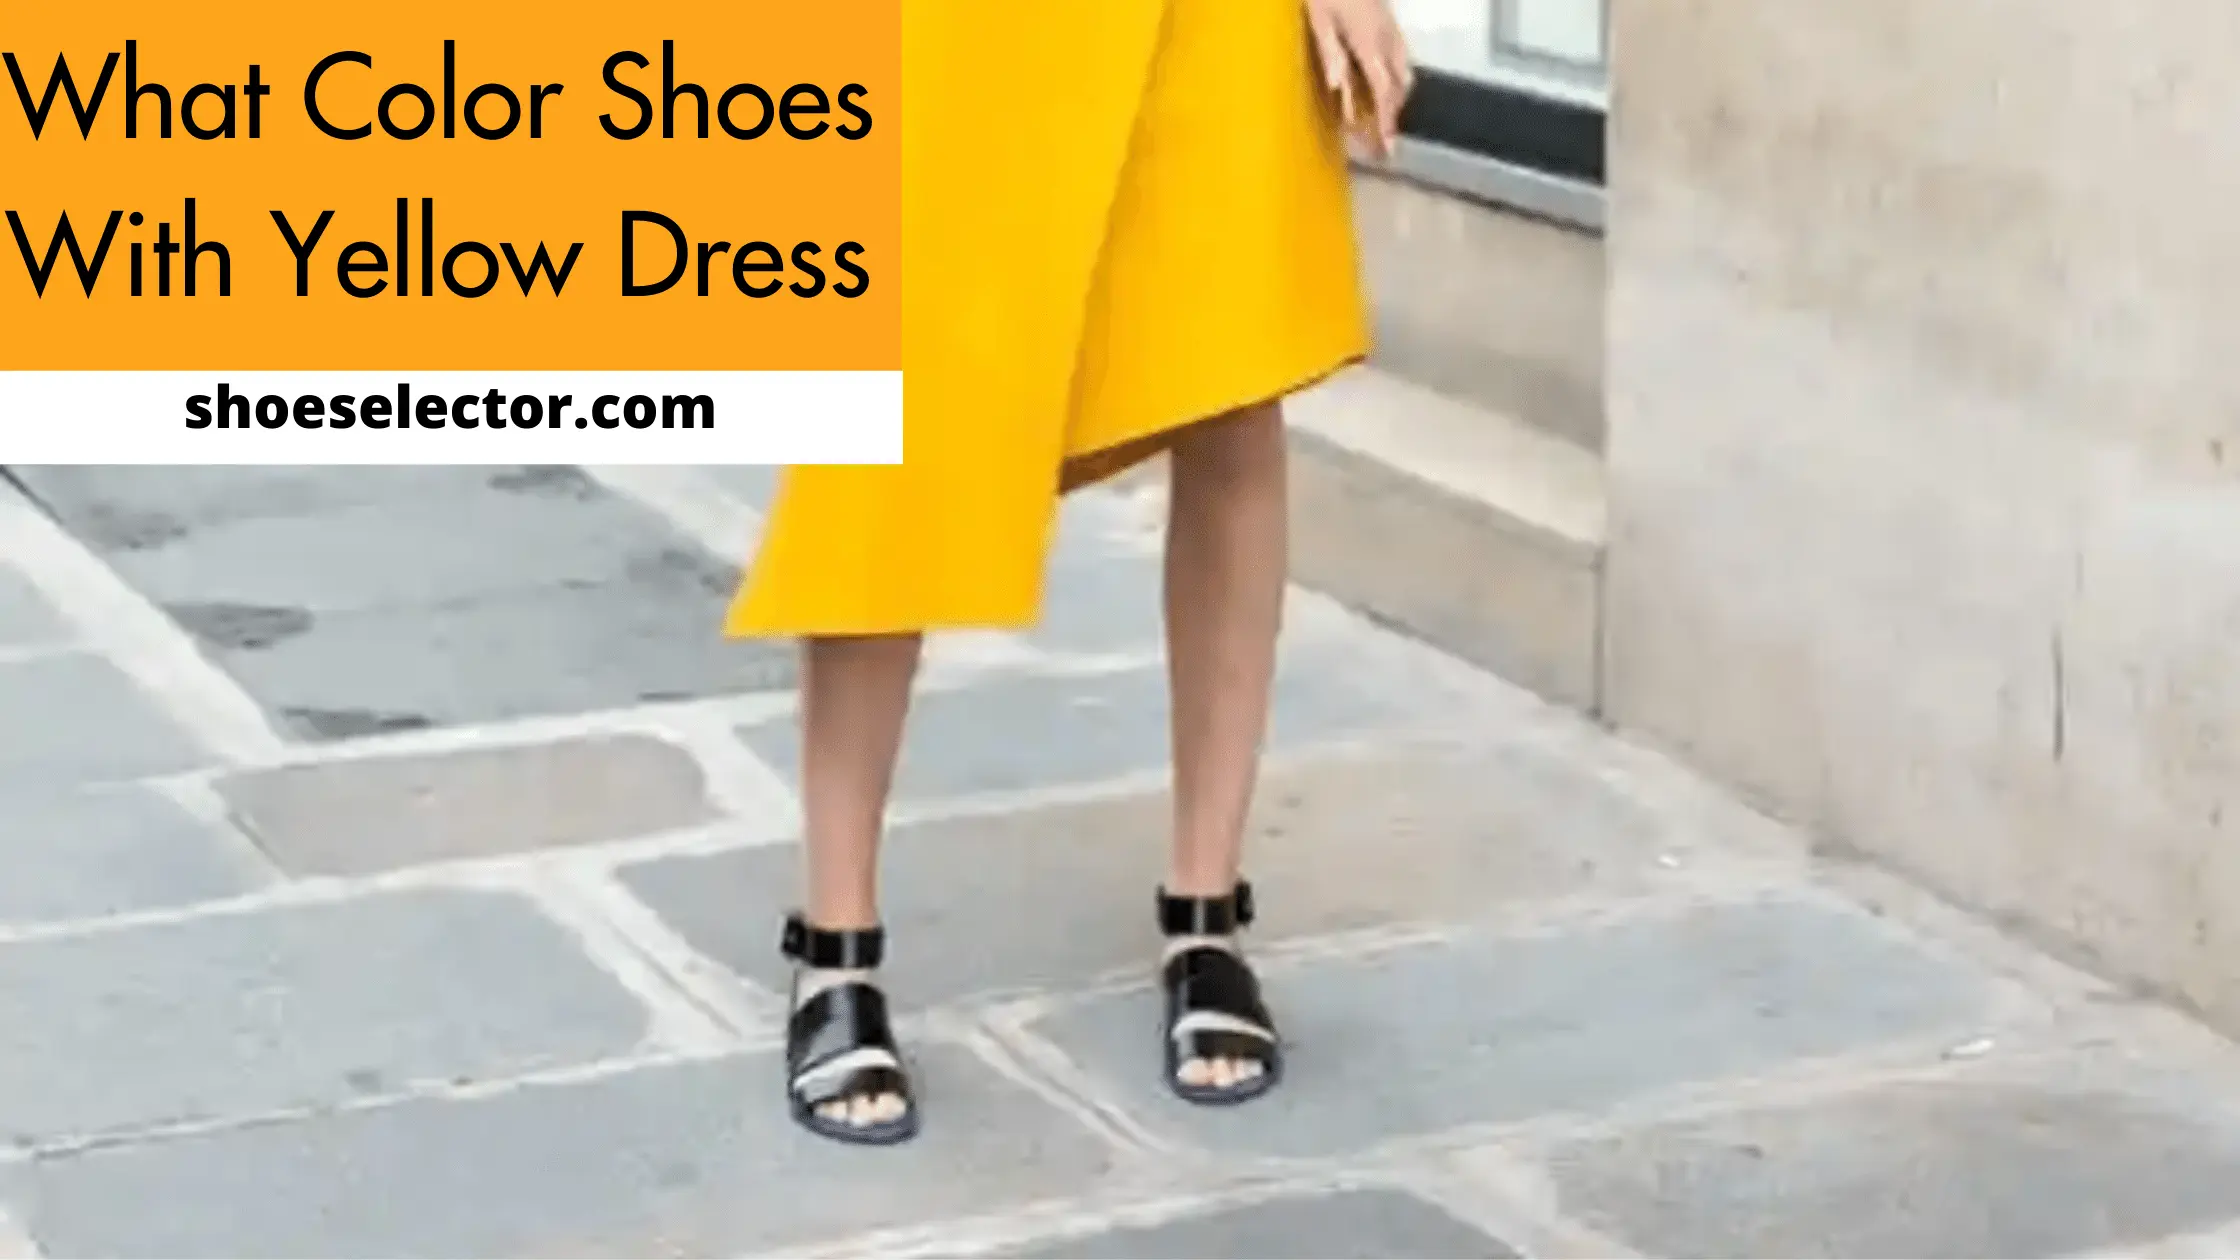 What Color Shoes With Yellow Dress? Easy Guide